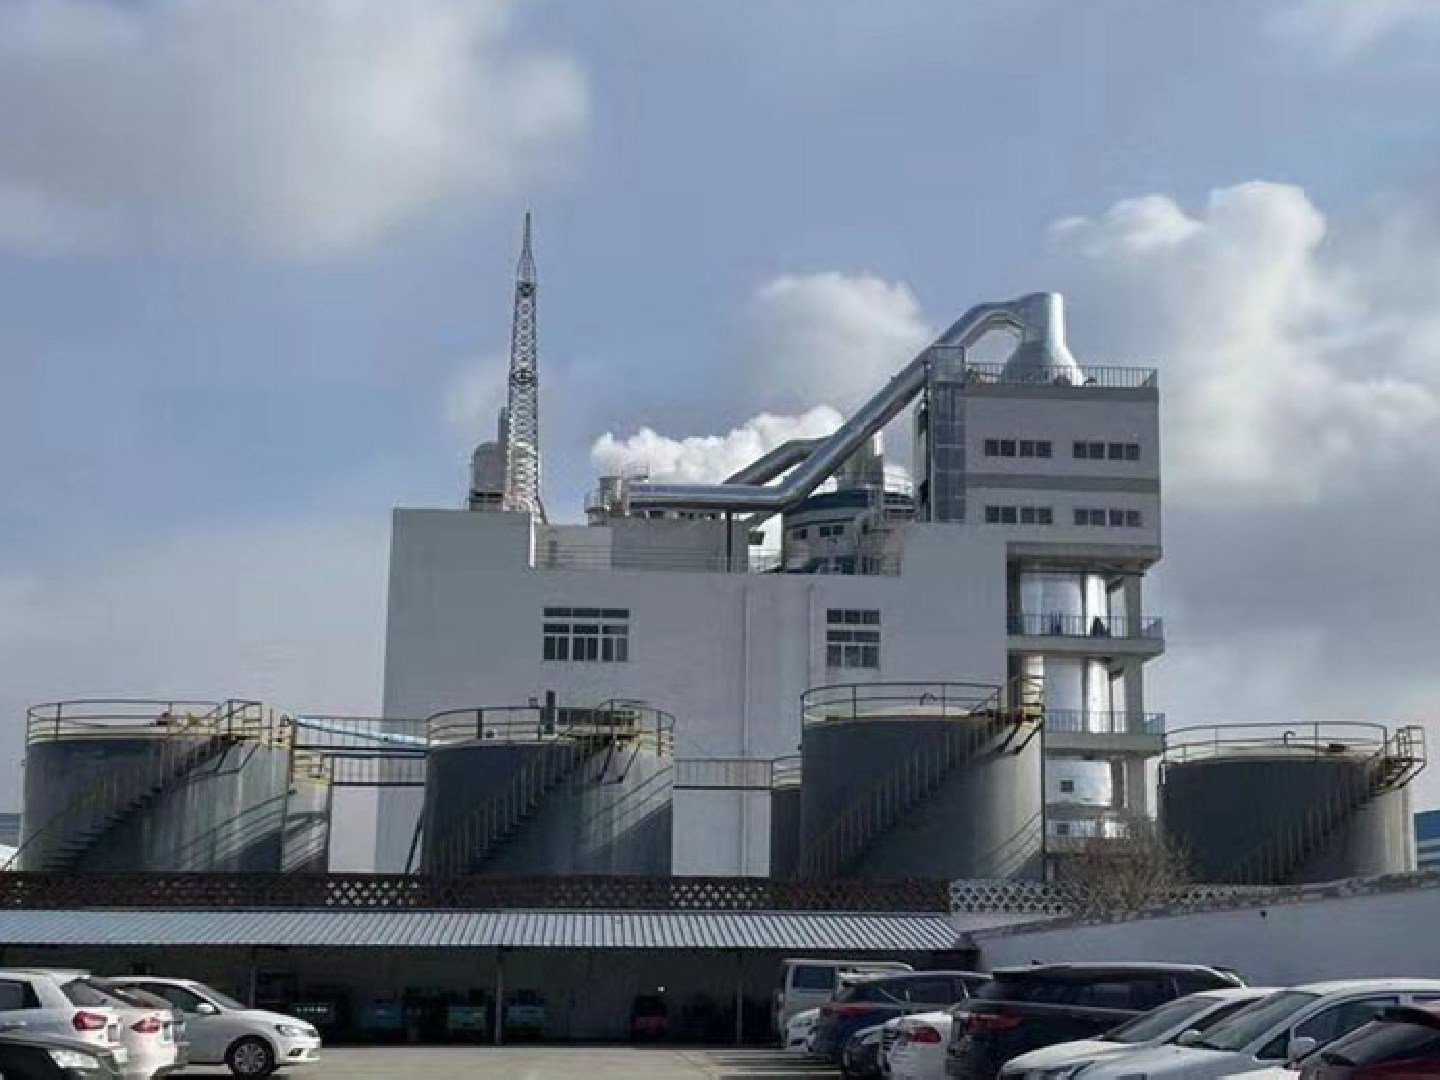 Spray tower detergent powder with annual output of 150,000 tons was put into operation